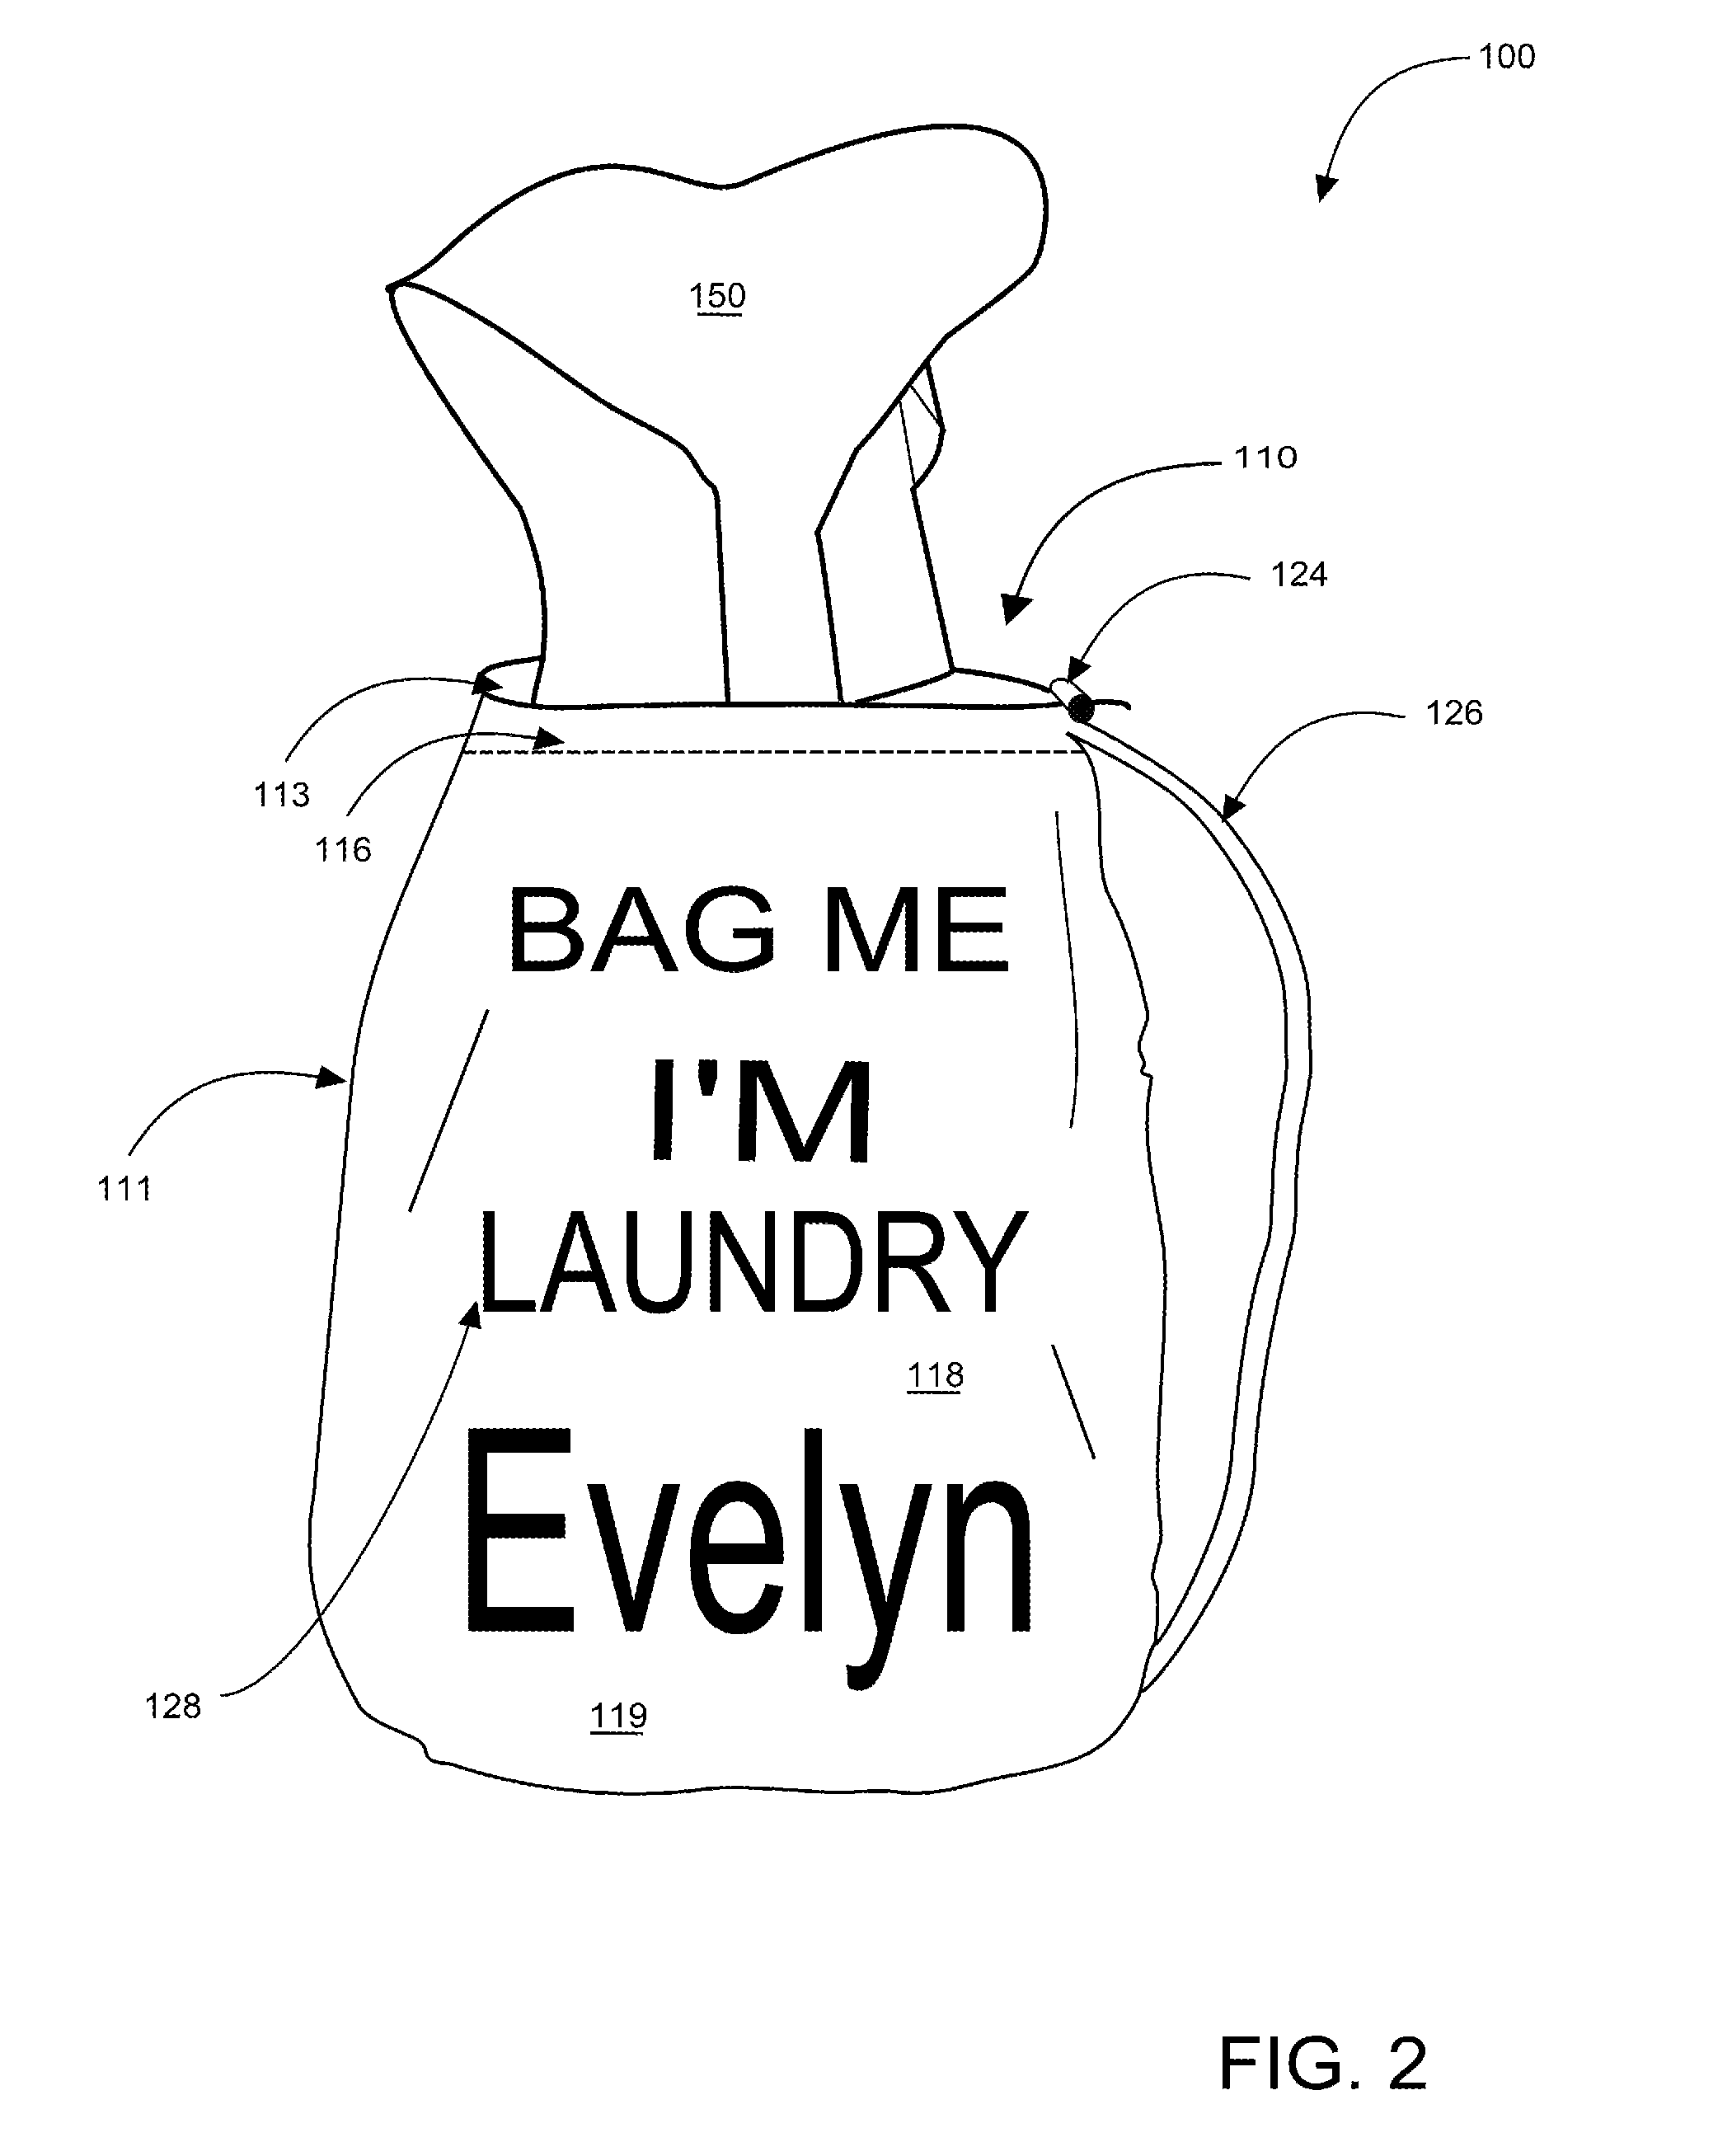 Bag me i'm laundry and bag me i'm dry cleaning systems